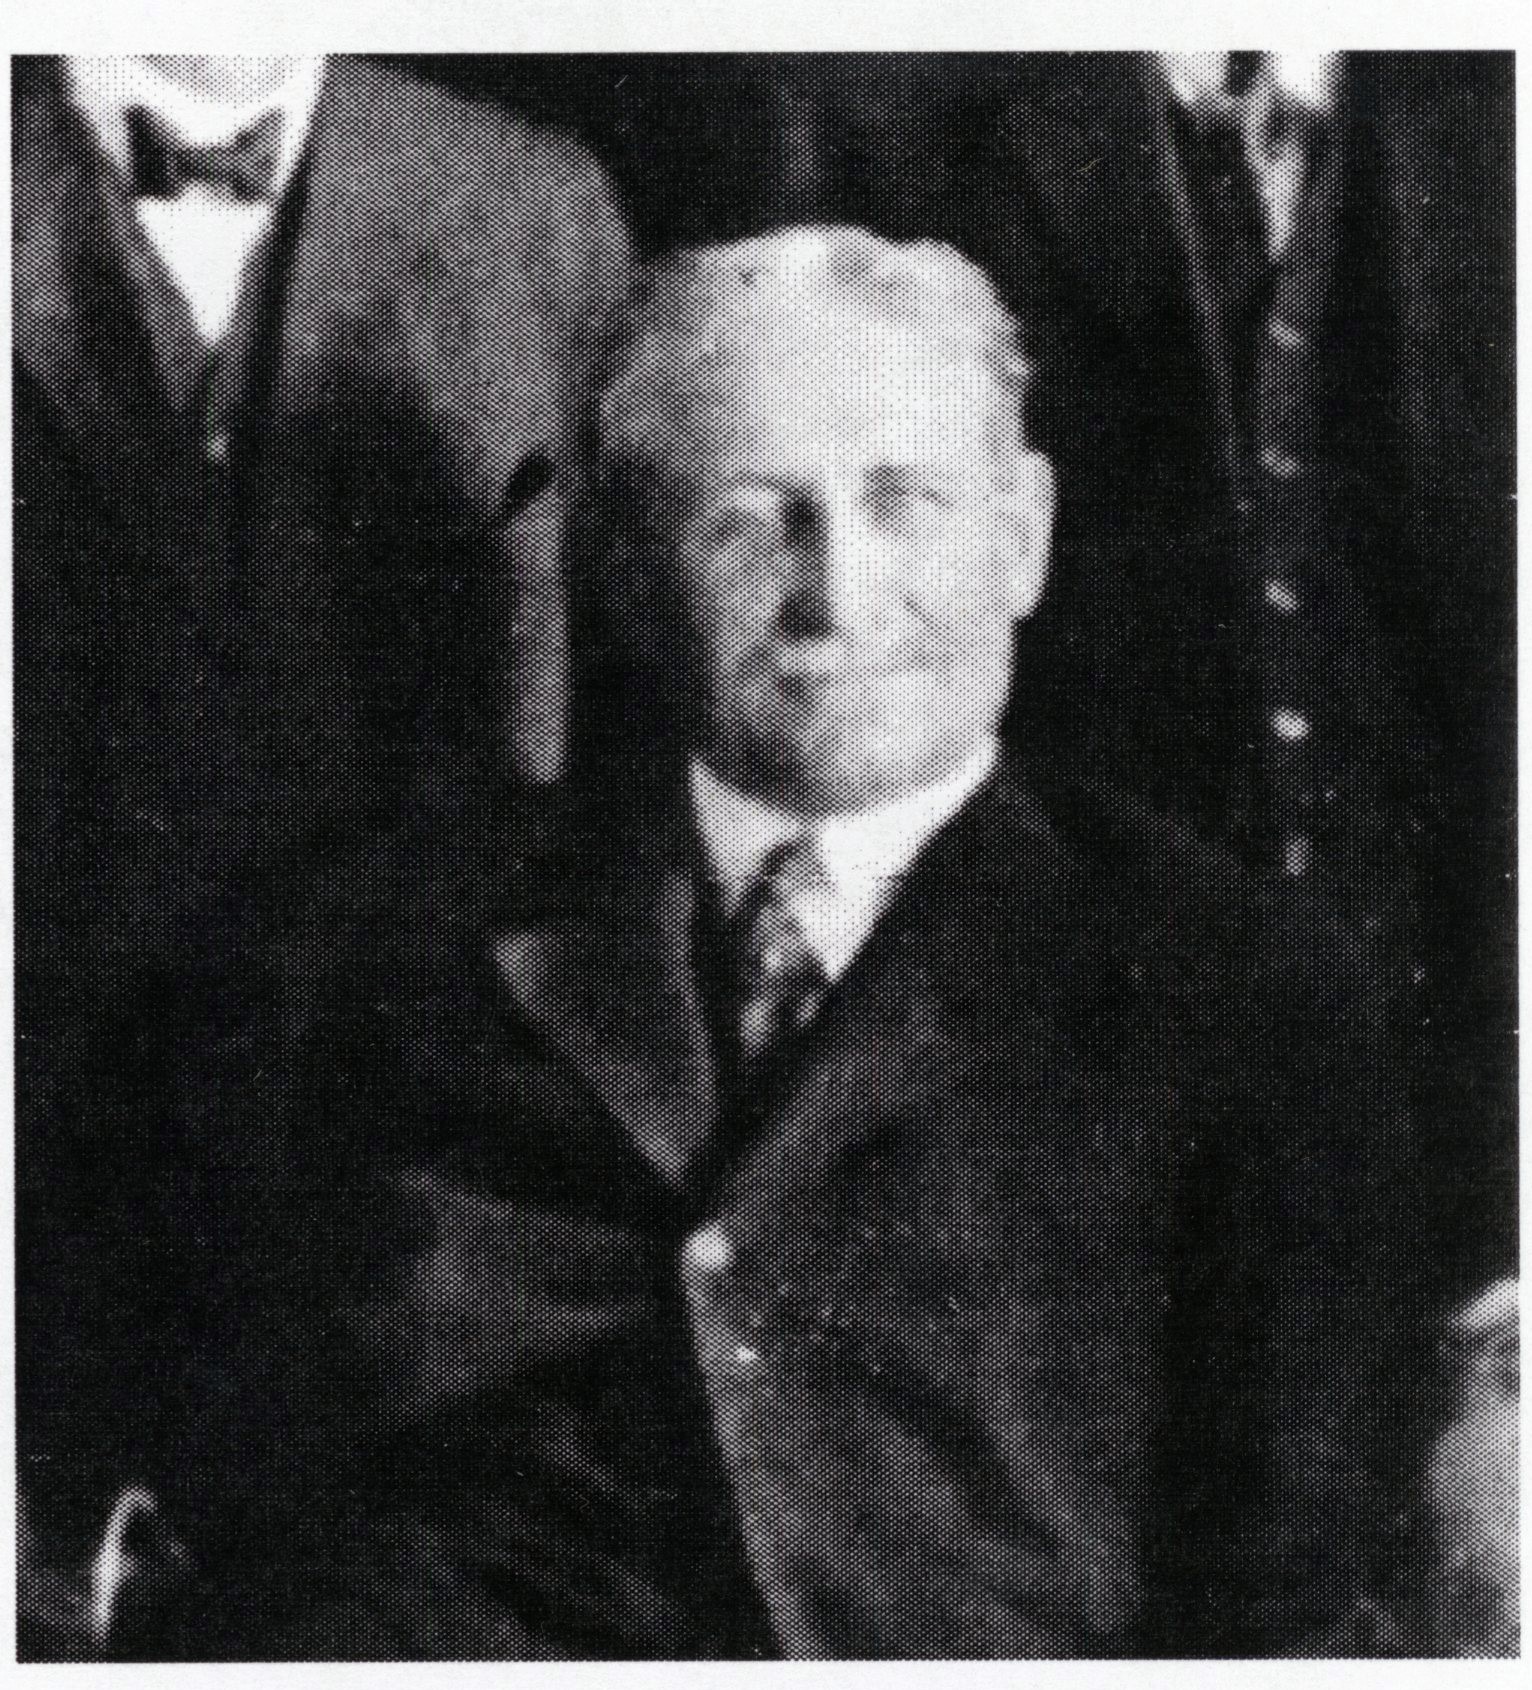 T.C. (Theodore Caspar) Lutz, His Role as the Central Contractor in the Building of the Key Maritime Settings for the 1893 Chicago World's Fair with Tom Lutz